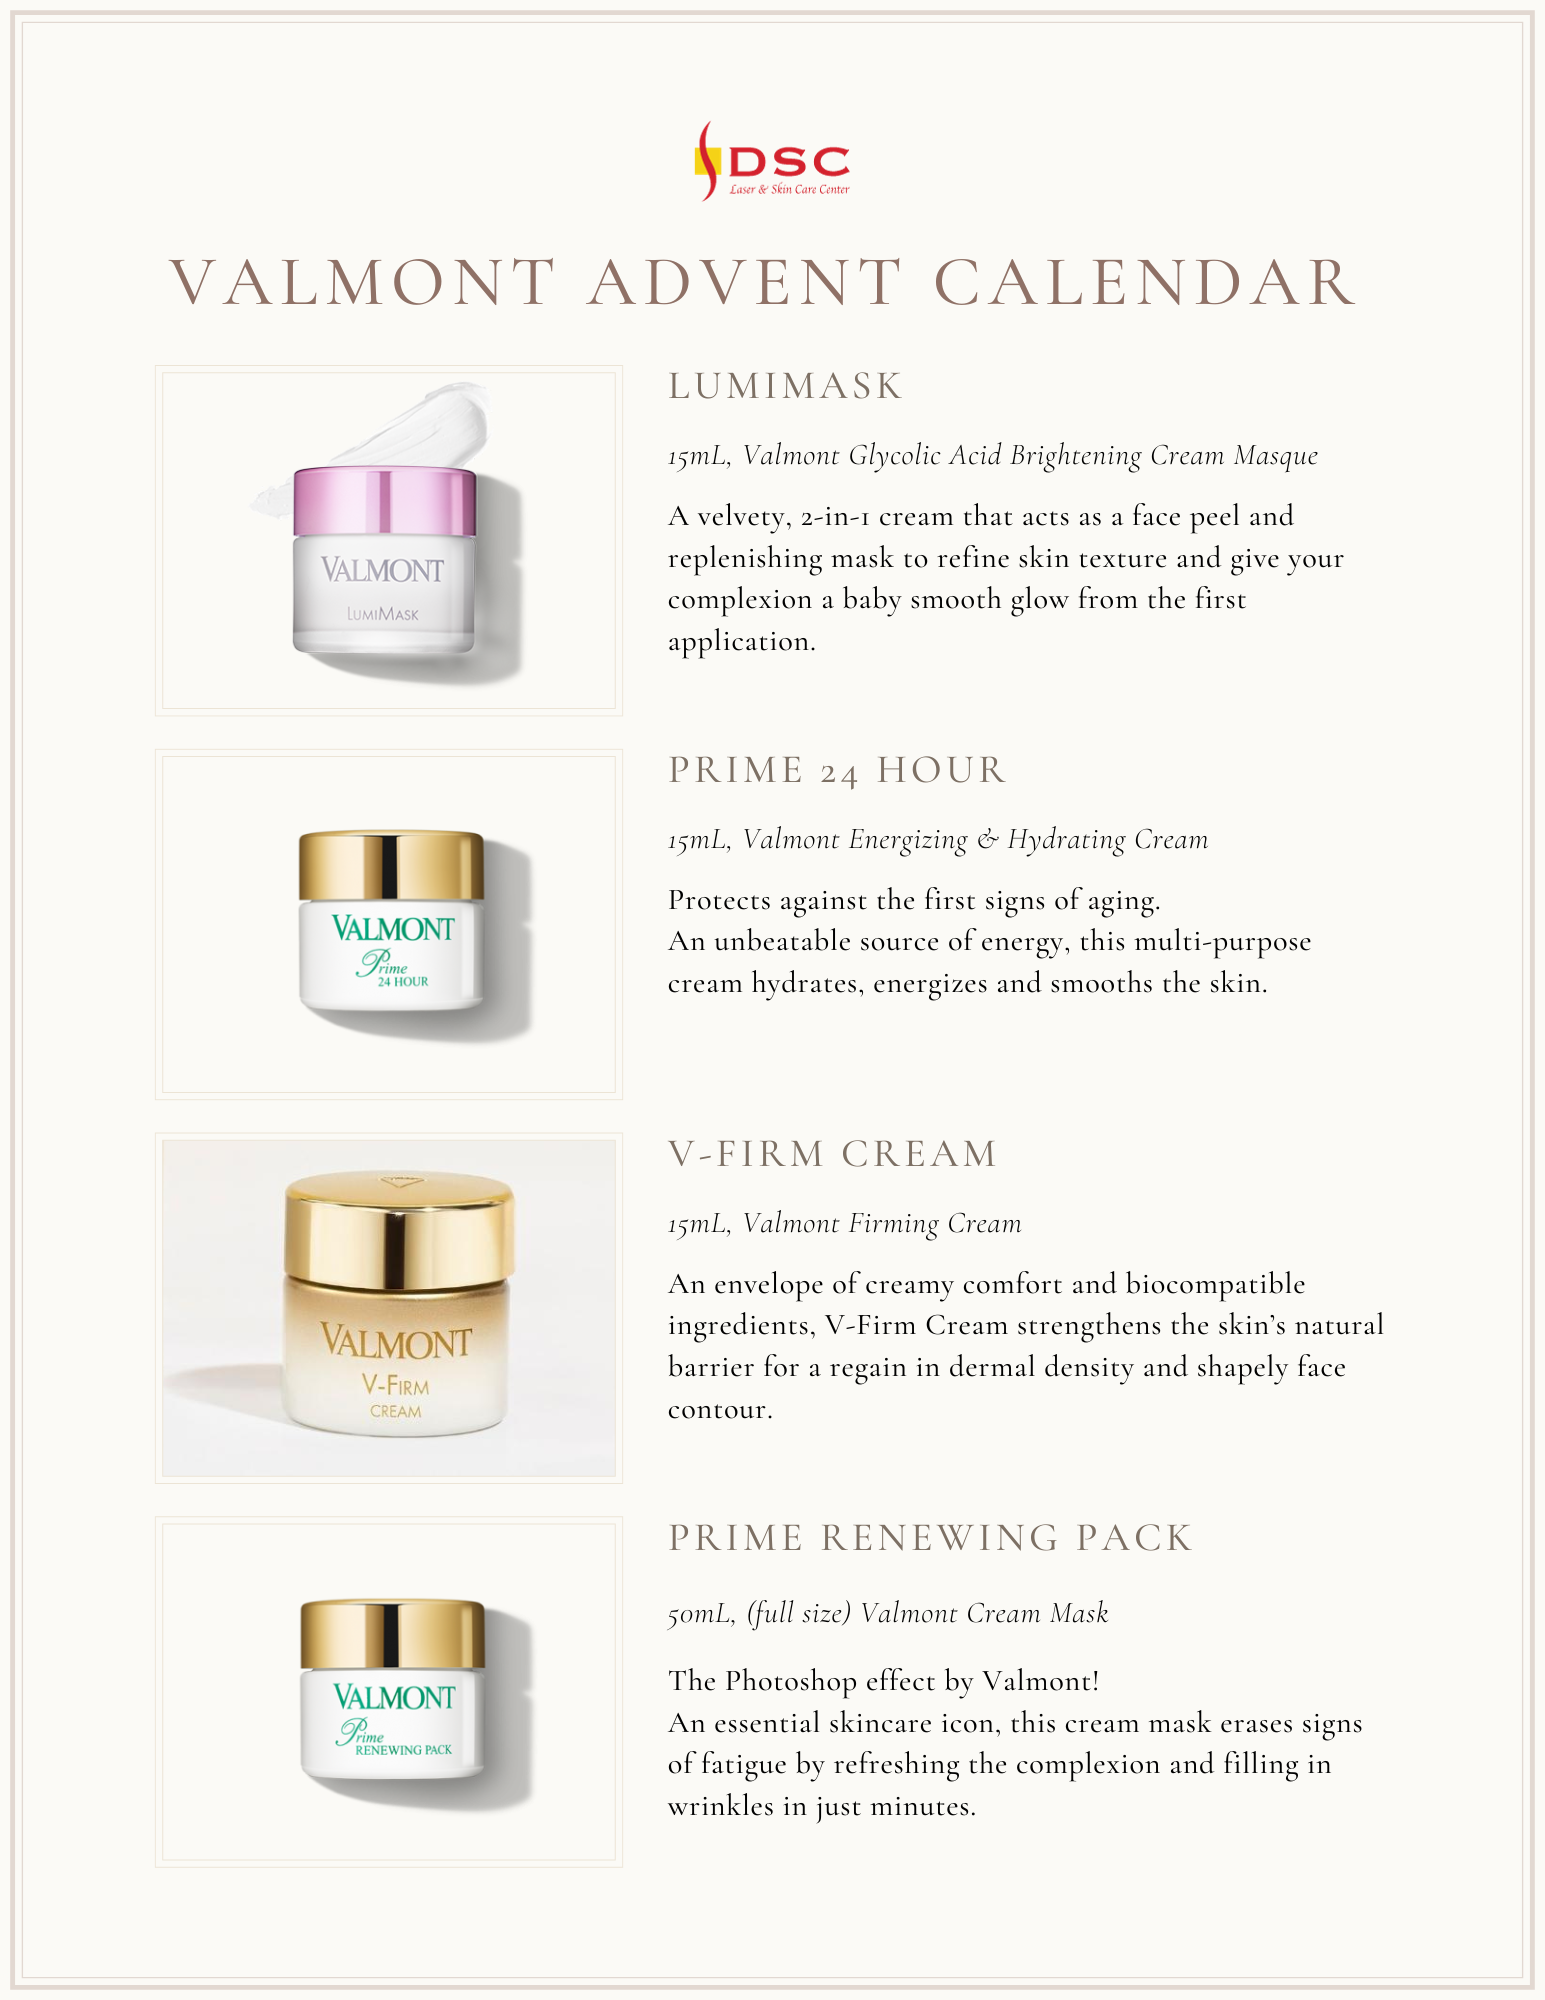 DSC Valmont 2023 Advent Calendar contents, page 1 of 3 with first 4 skincare items included from top to bottom: Valmont Lumimask AHA/Glycolic Acid Exfoliating masque, Valmont Prime 24 Hour Cream, Valmont V-Firm Cream, and Valmont Prime Renewing Pack cream masque